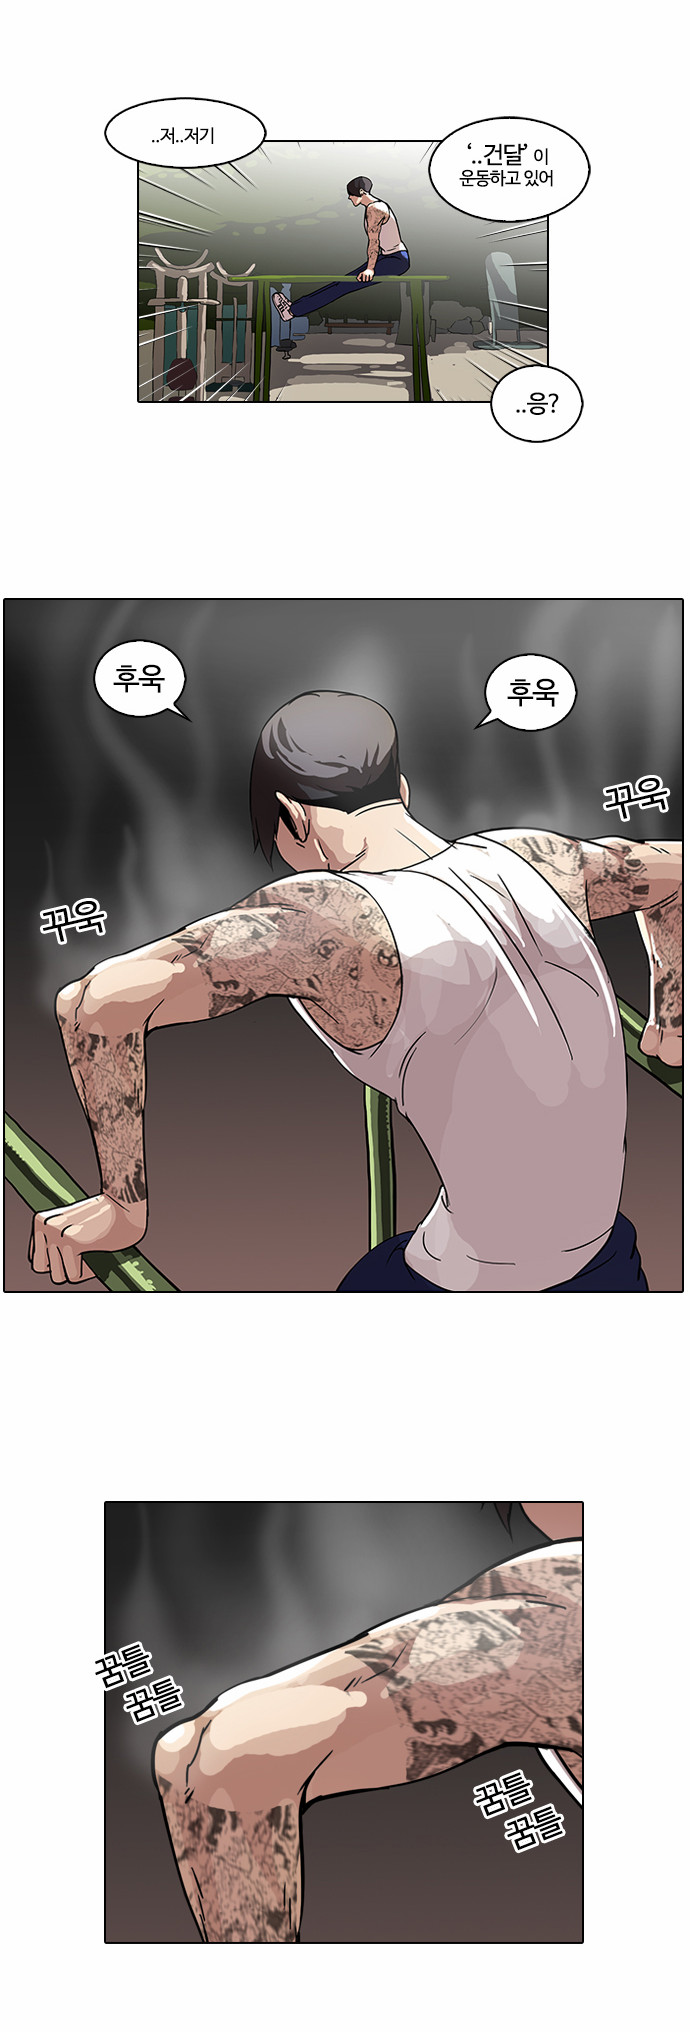 Lookism - Chapter 57 - Page 3